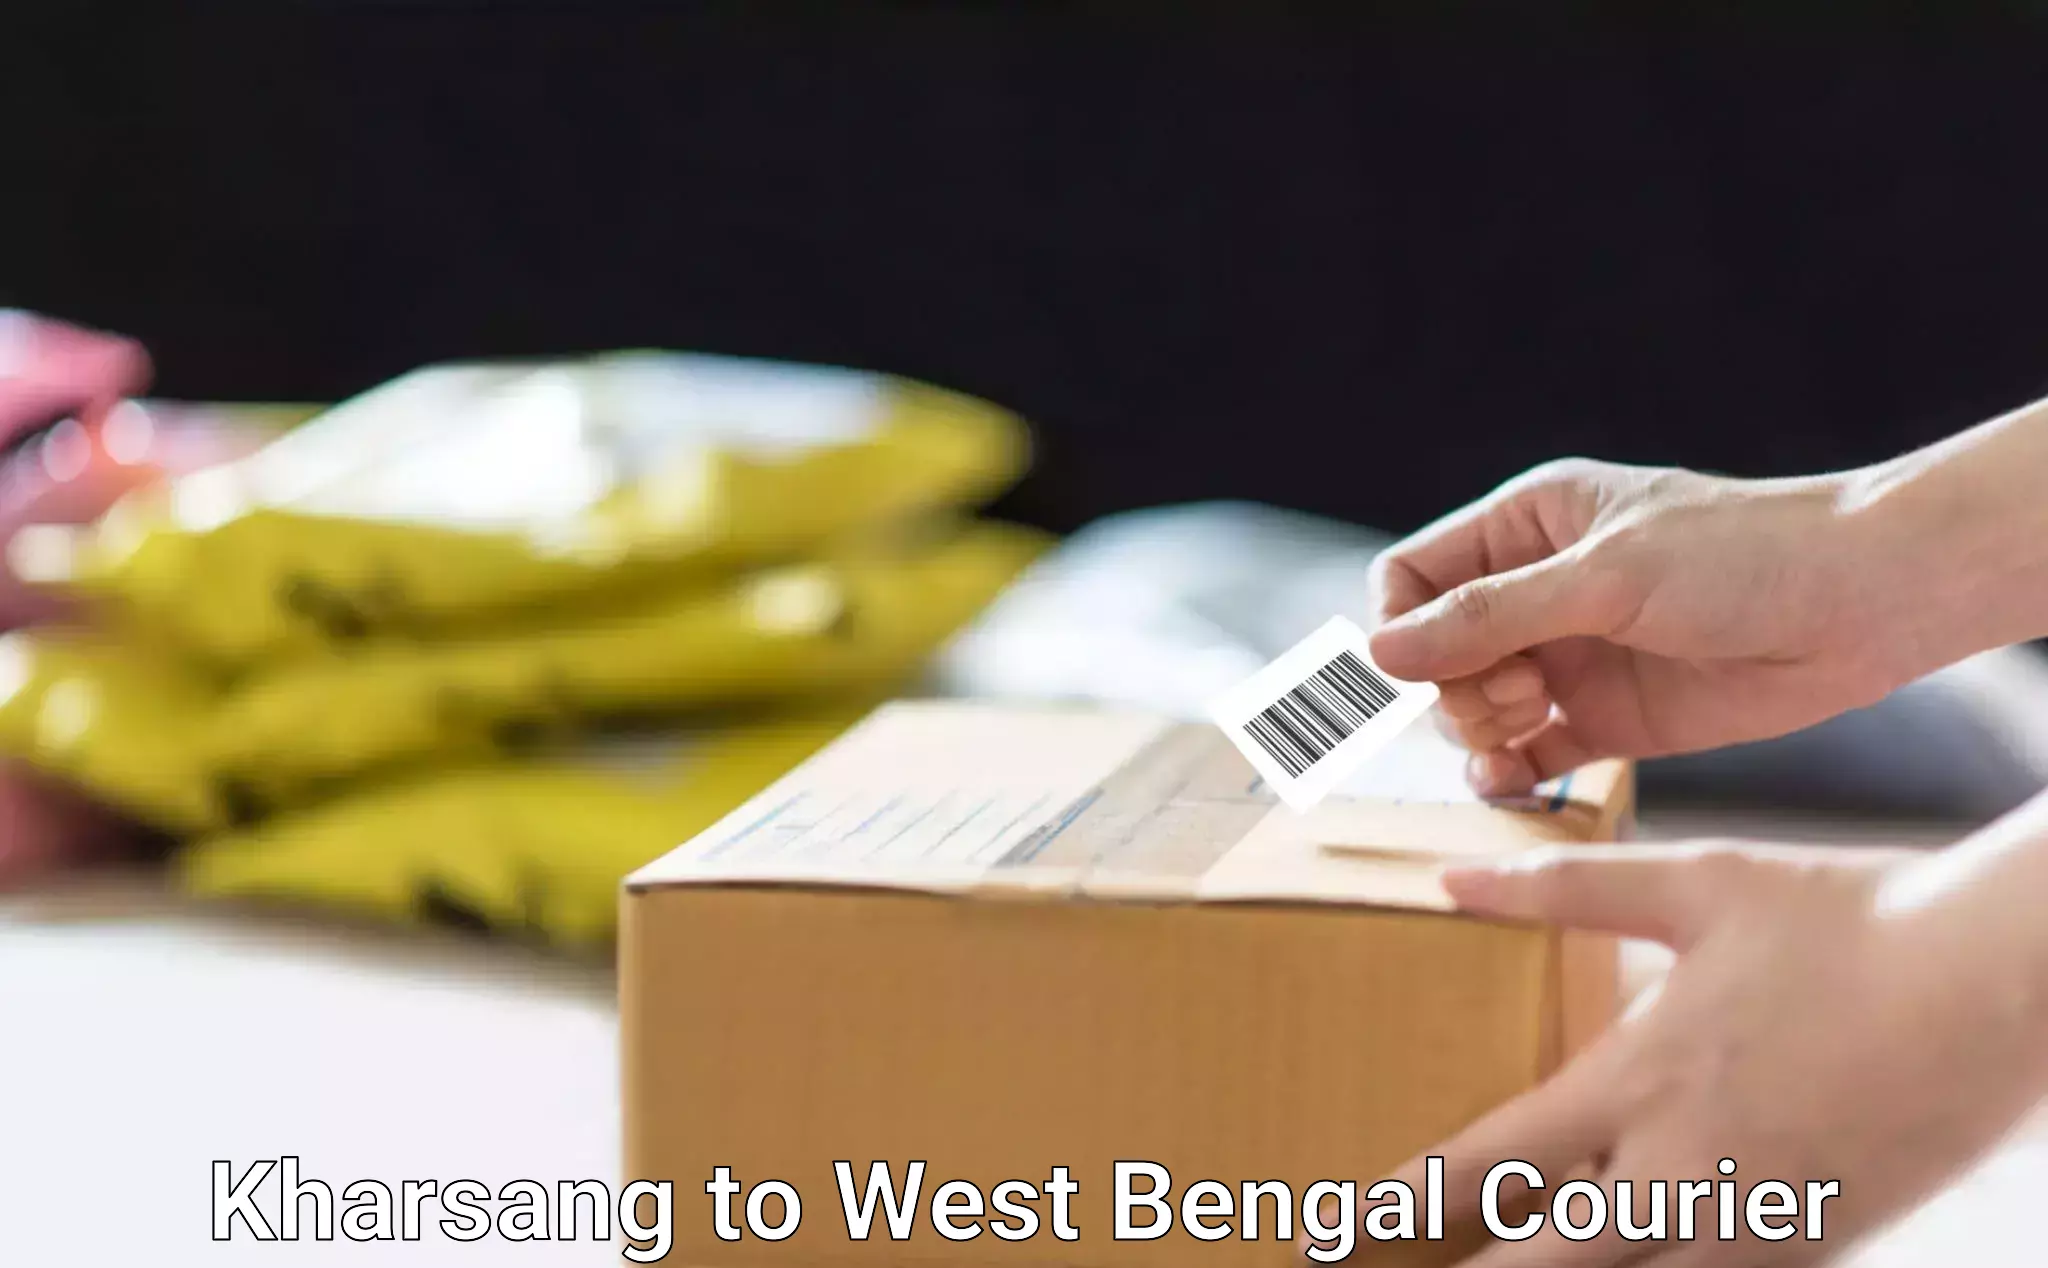 Modern courier technology Kharsang to West Bengal